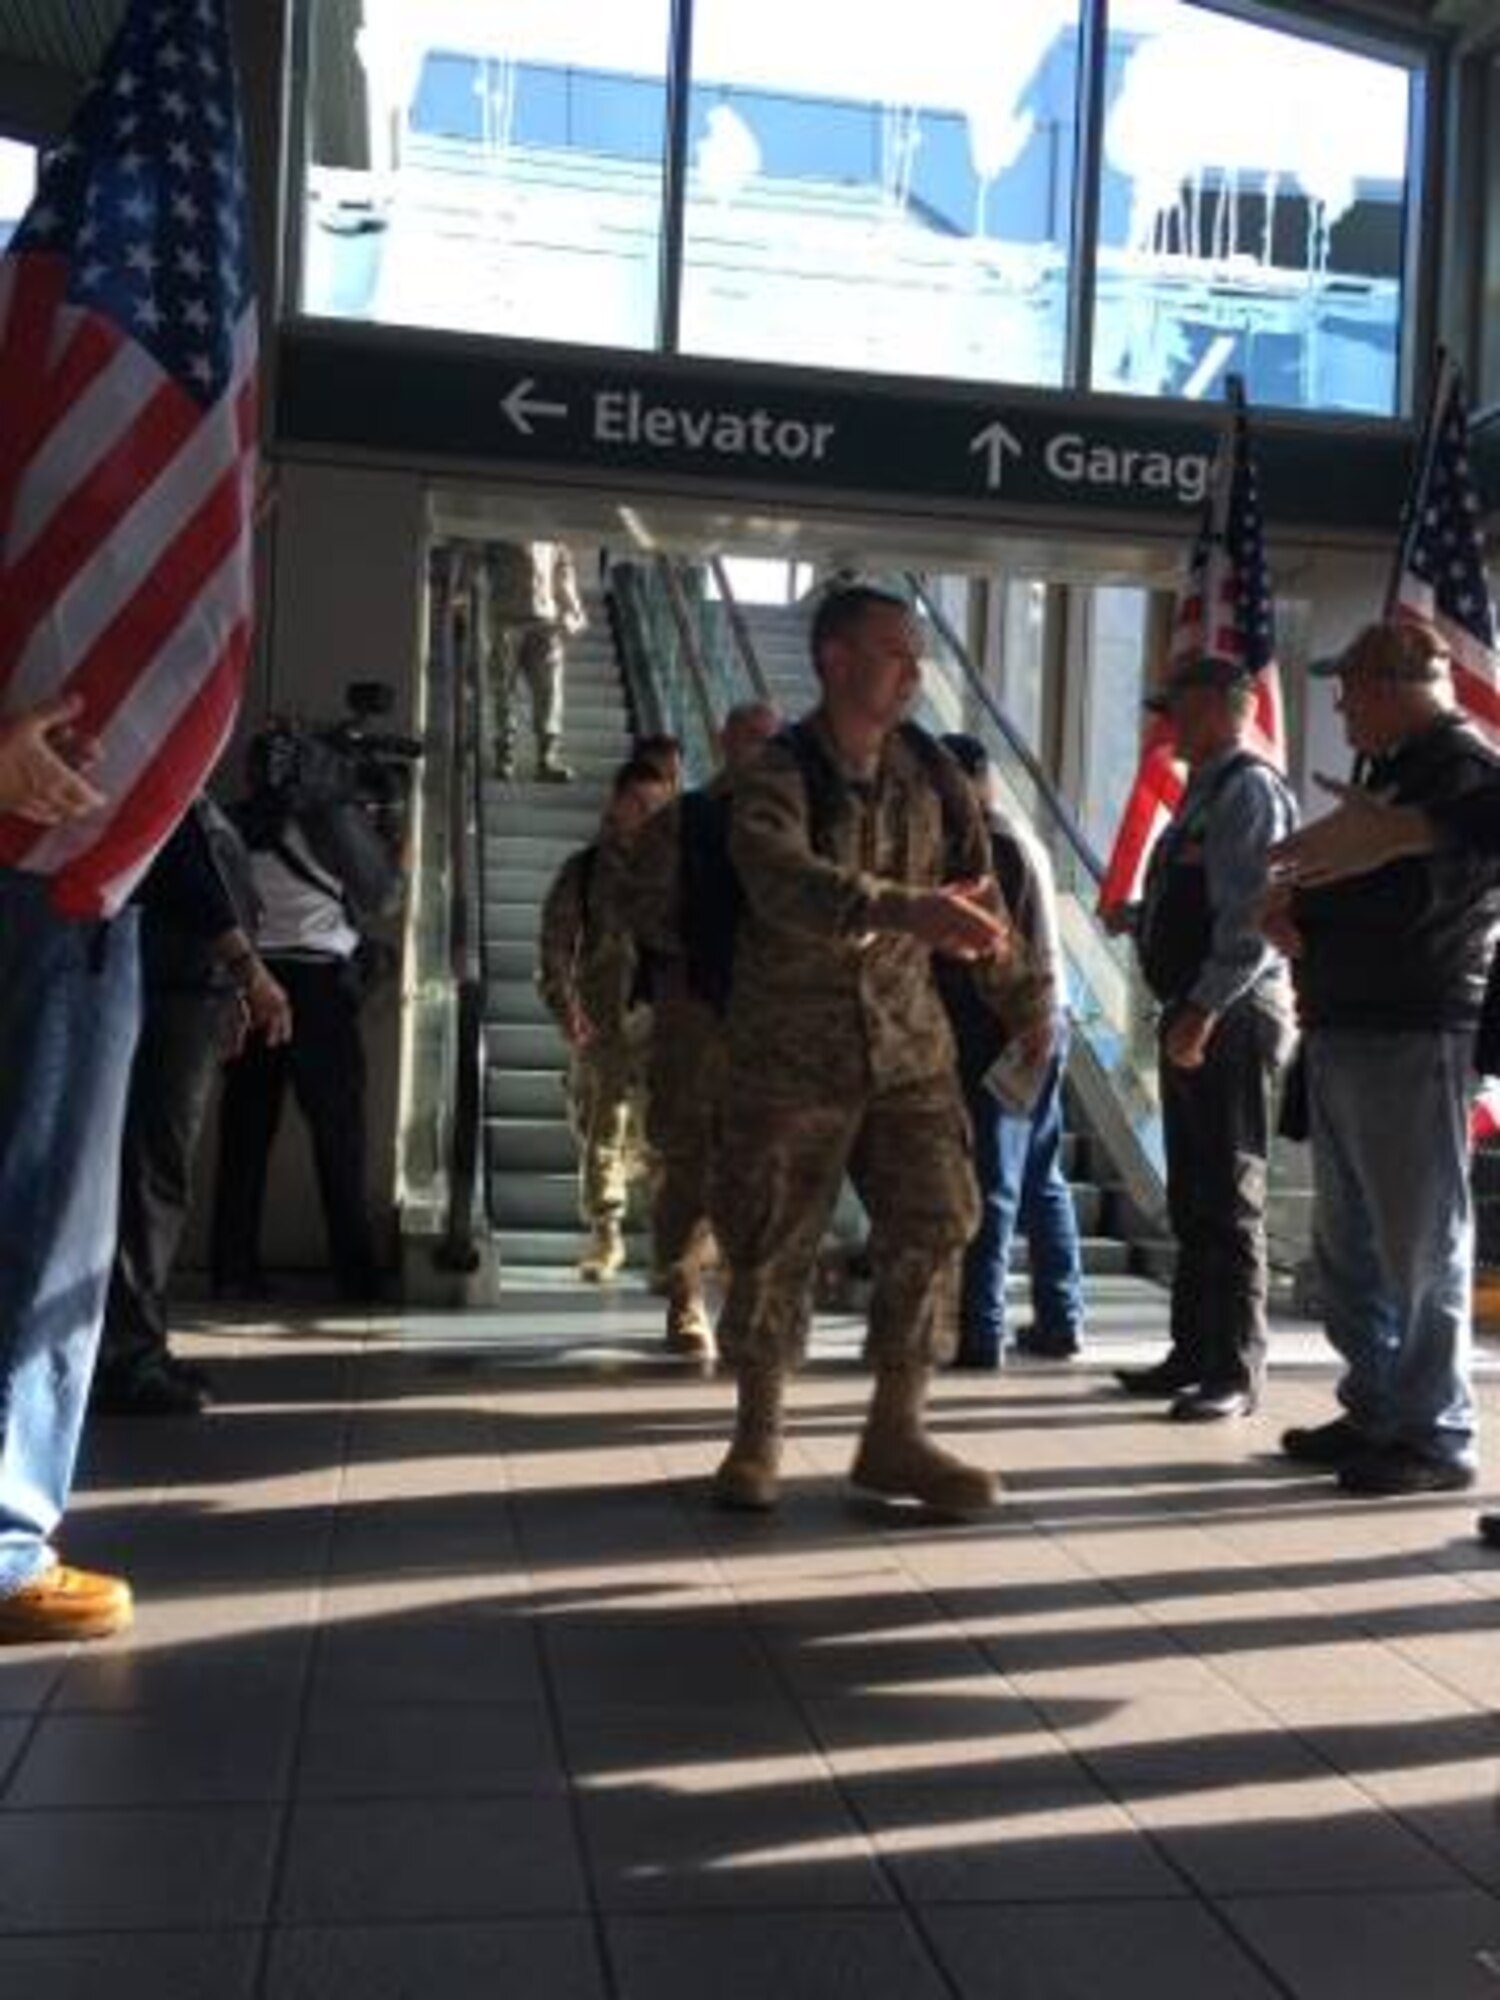 Members of 45th and 55th Aerial Port Squadrons returned from deployment in Southwest Asia supporting Operation Inherent Resolve Nov. 18, 2015. The Airmen were greeted by friends and family at Sacramento International Airport. The Patriot Guard Riders of Northern California were also on hand to welcome the returning warriors. (Courtesy photos by Danielle Eaton)
